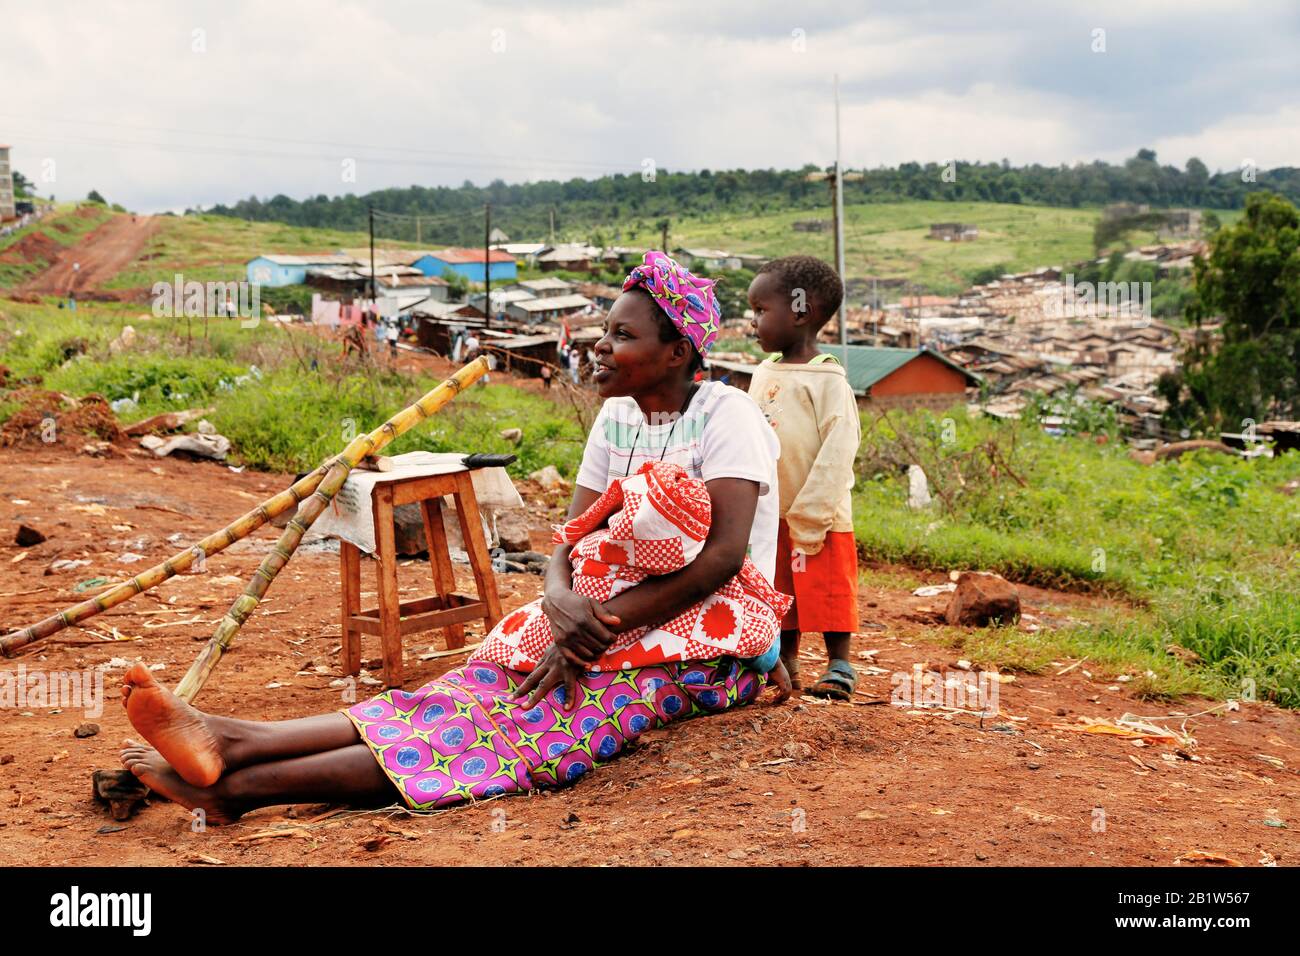 Women with baby sitting on the ground in slum earia Stock Photo